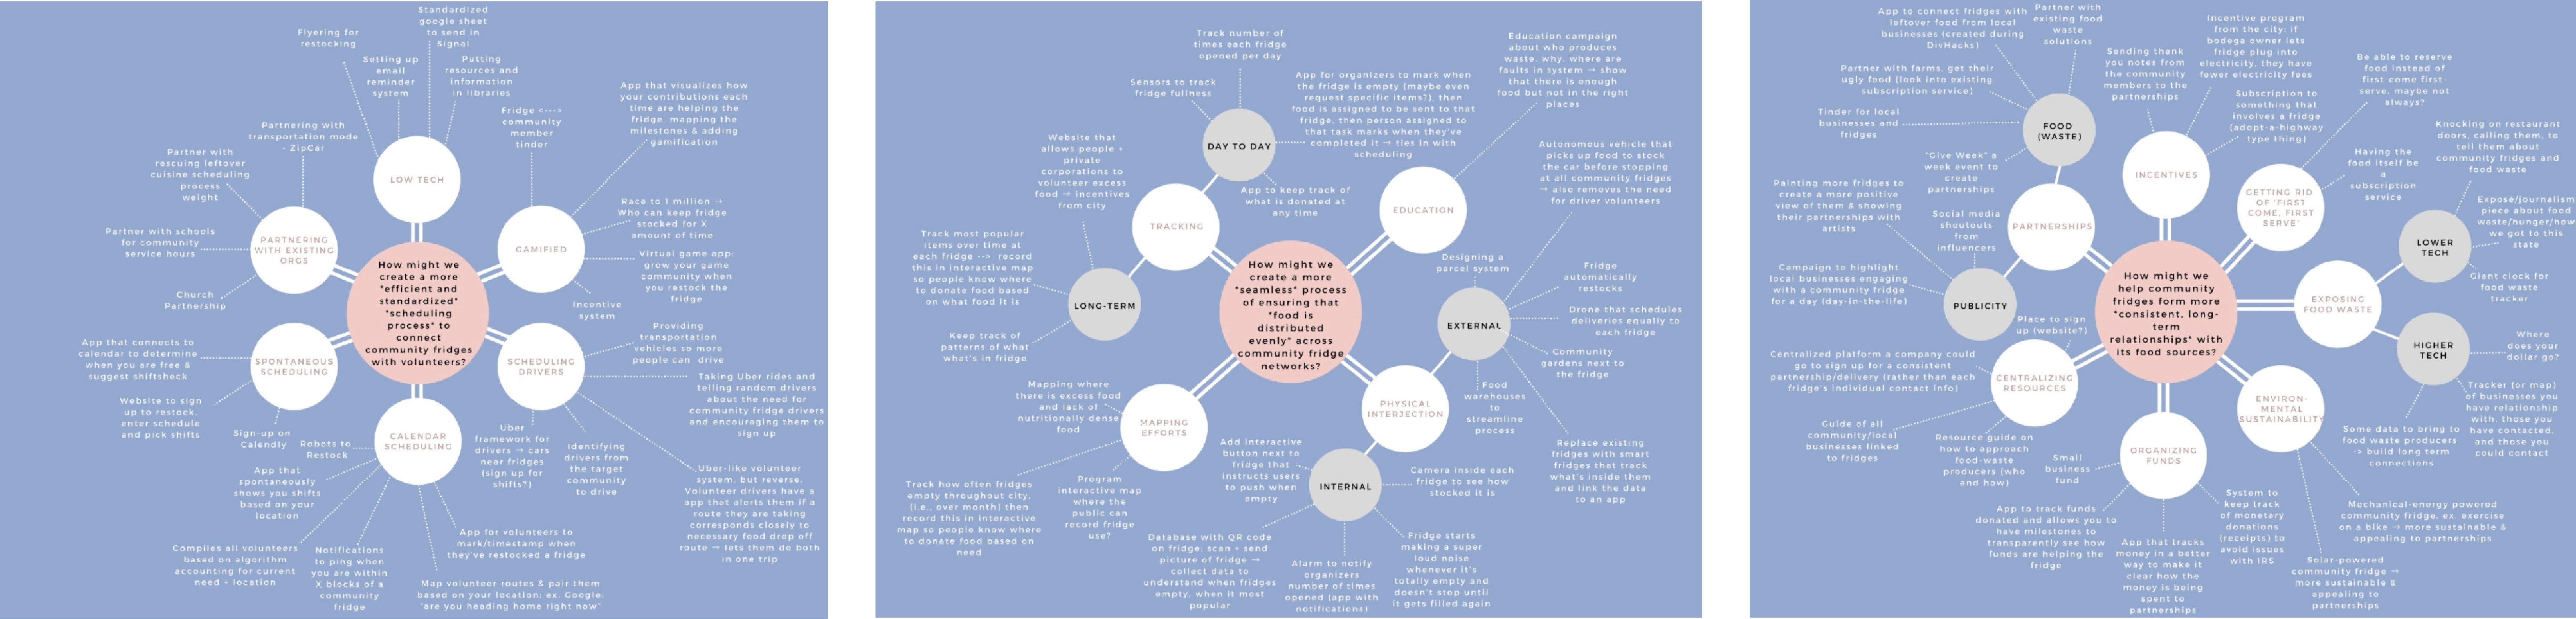 3 mind maps showing at least 30 ideas stemming from each how might we question